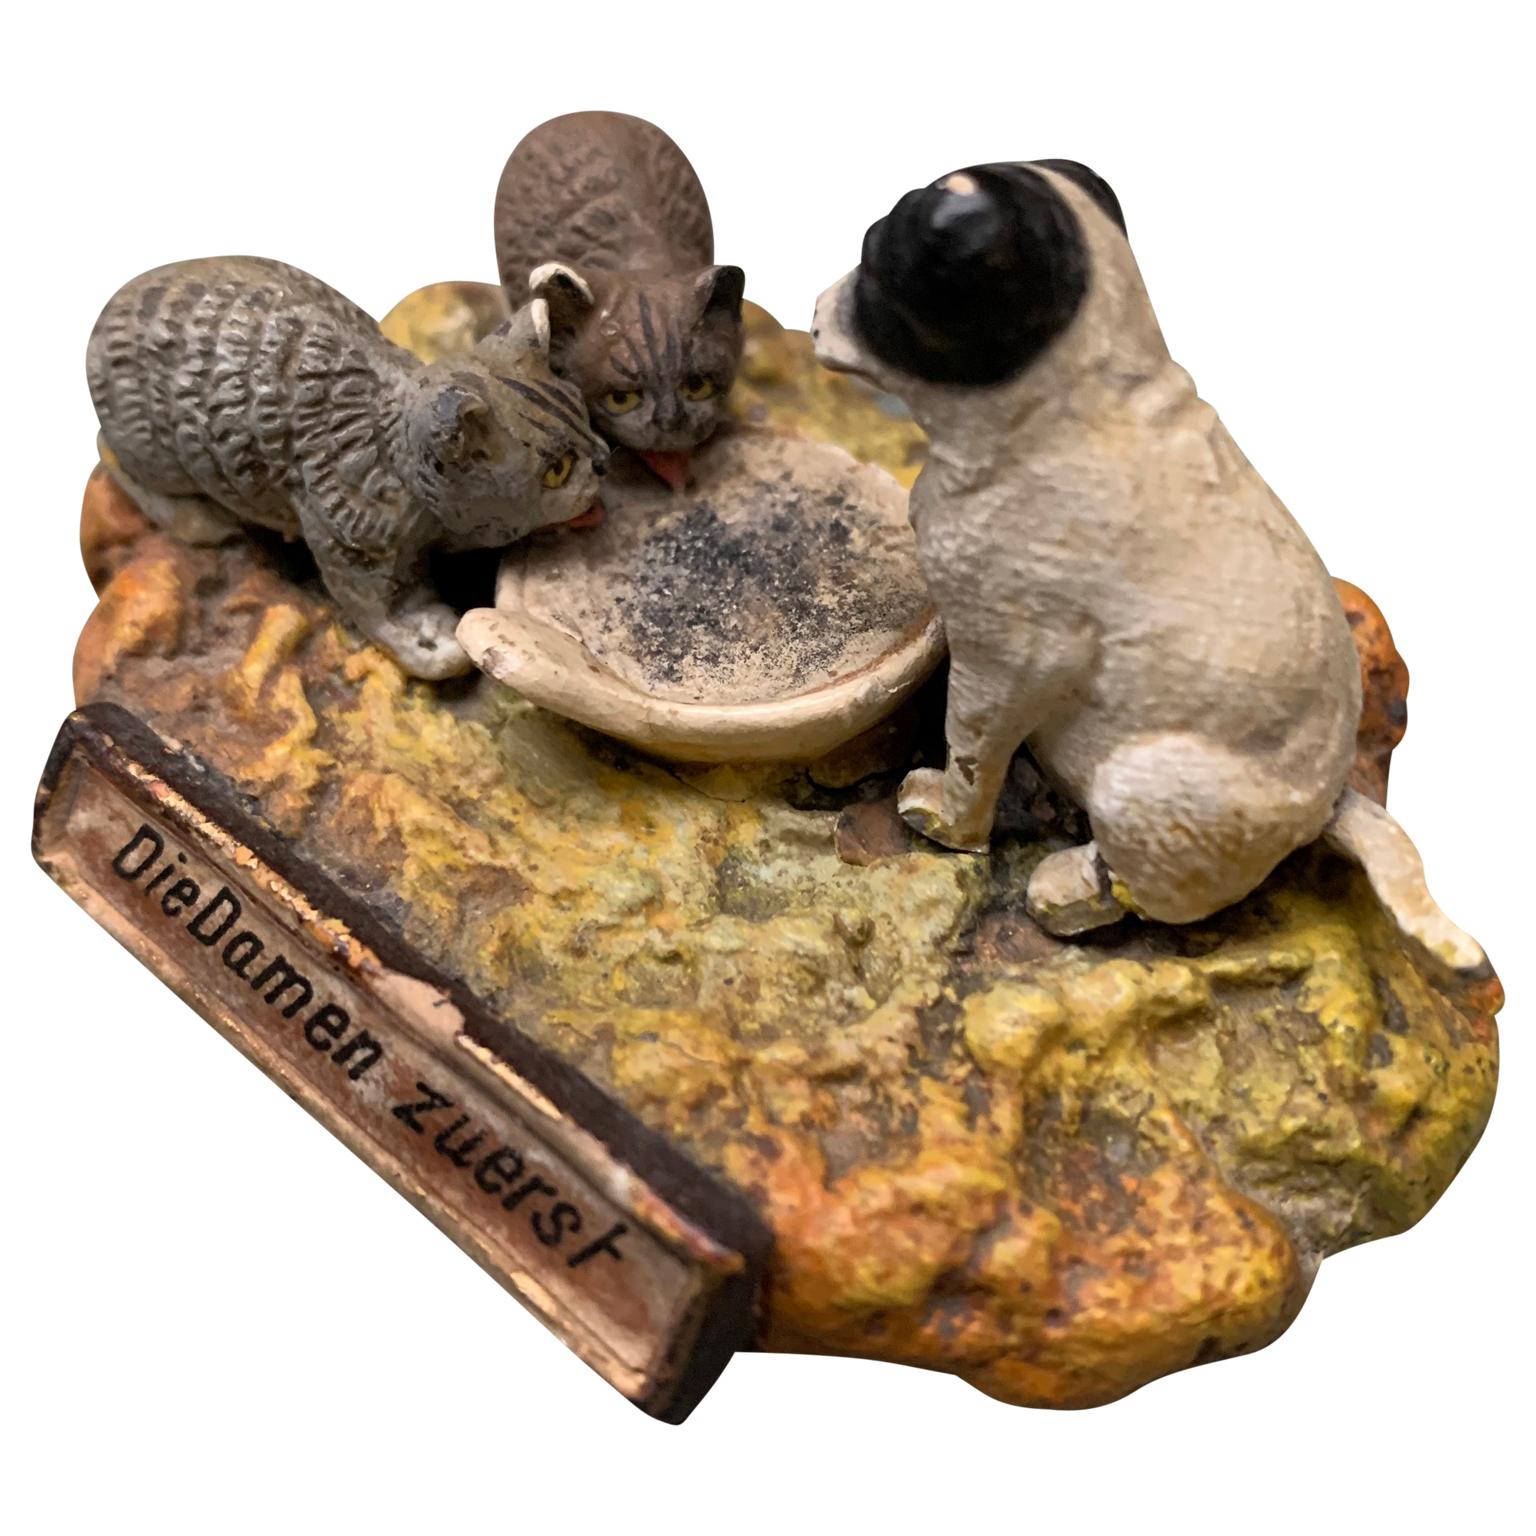 A group of small wiener bronze style figurines in metal and plaster illustrating pets eating. The German text of 